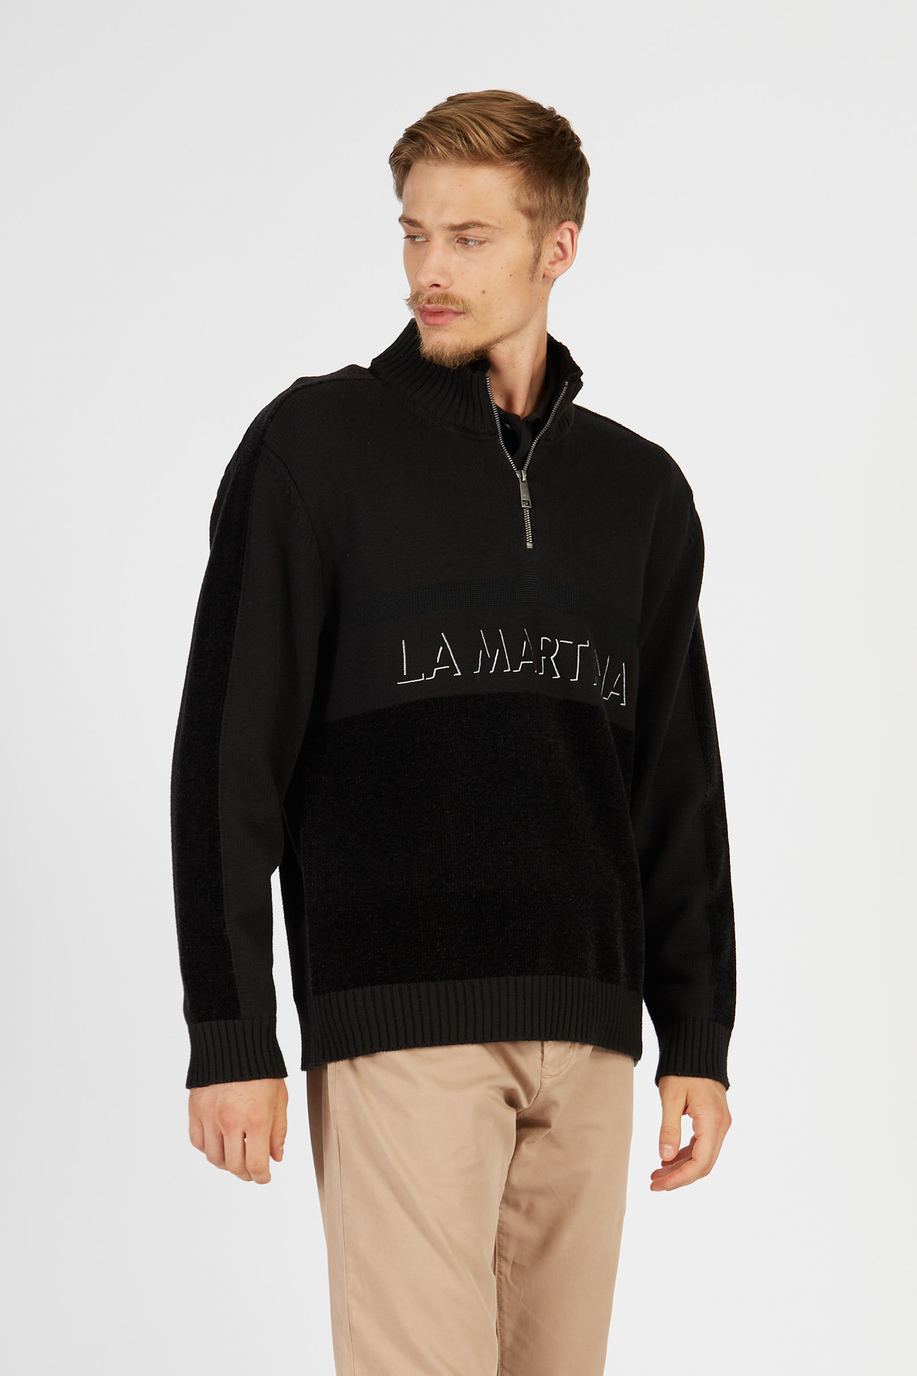 Men’s knit sweater with long sleeves in cotton and wool blend comfort fit - Jet Set | La Martina - Official Online Shop